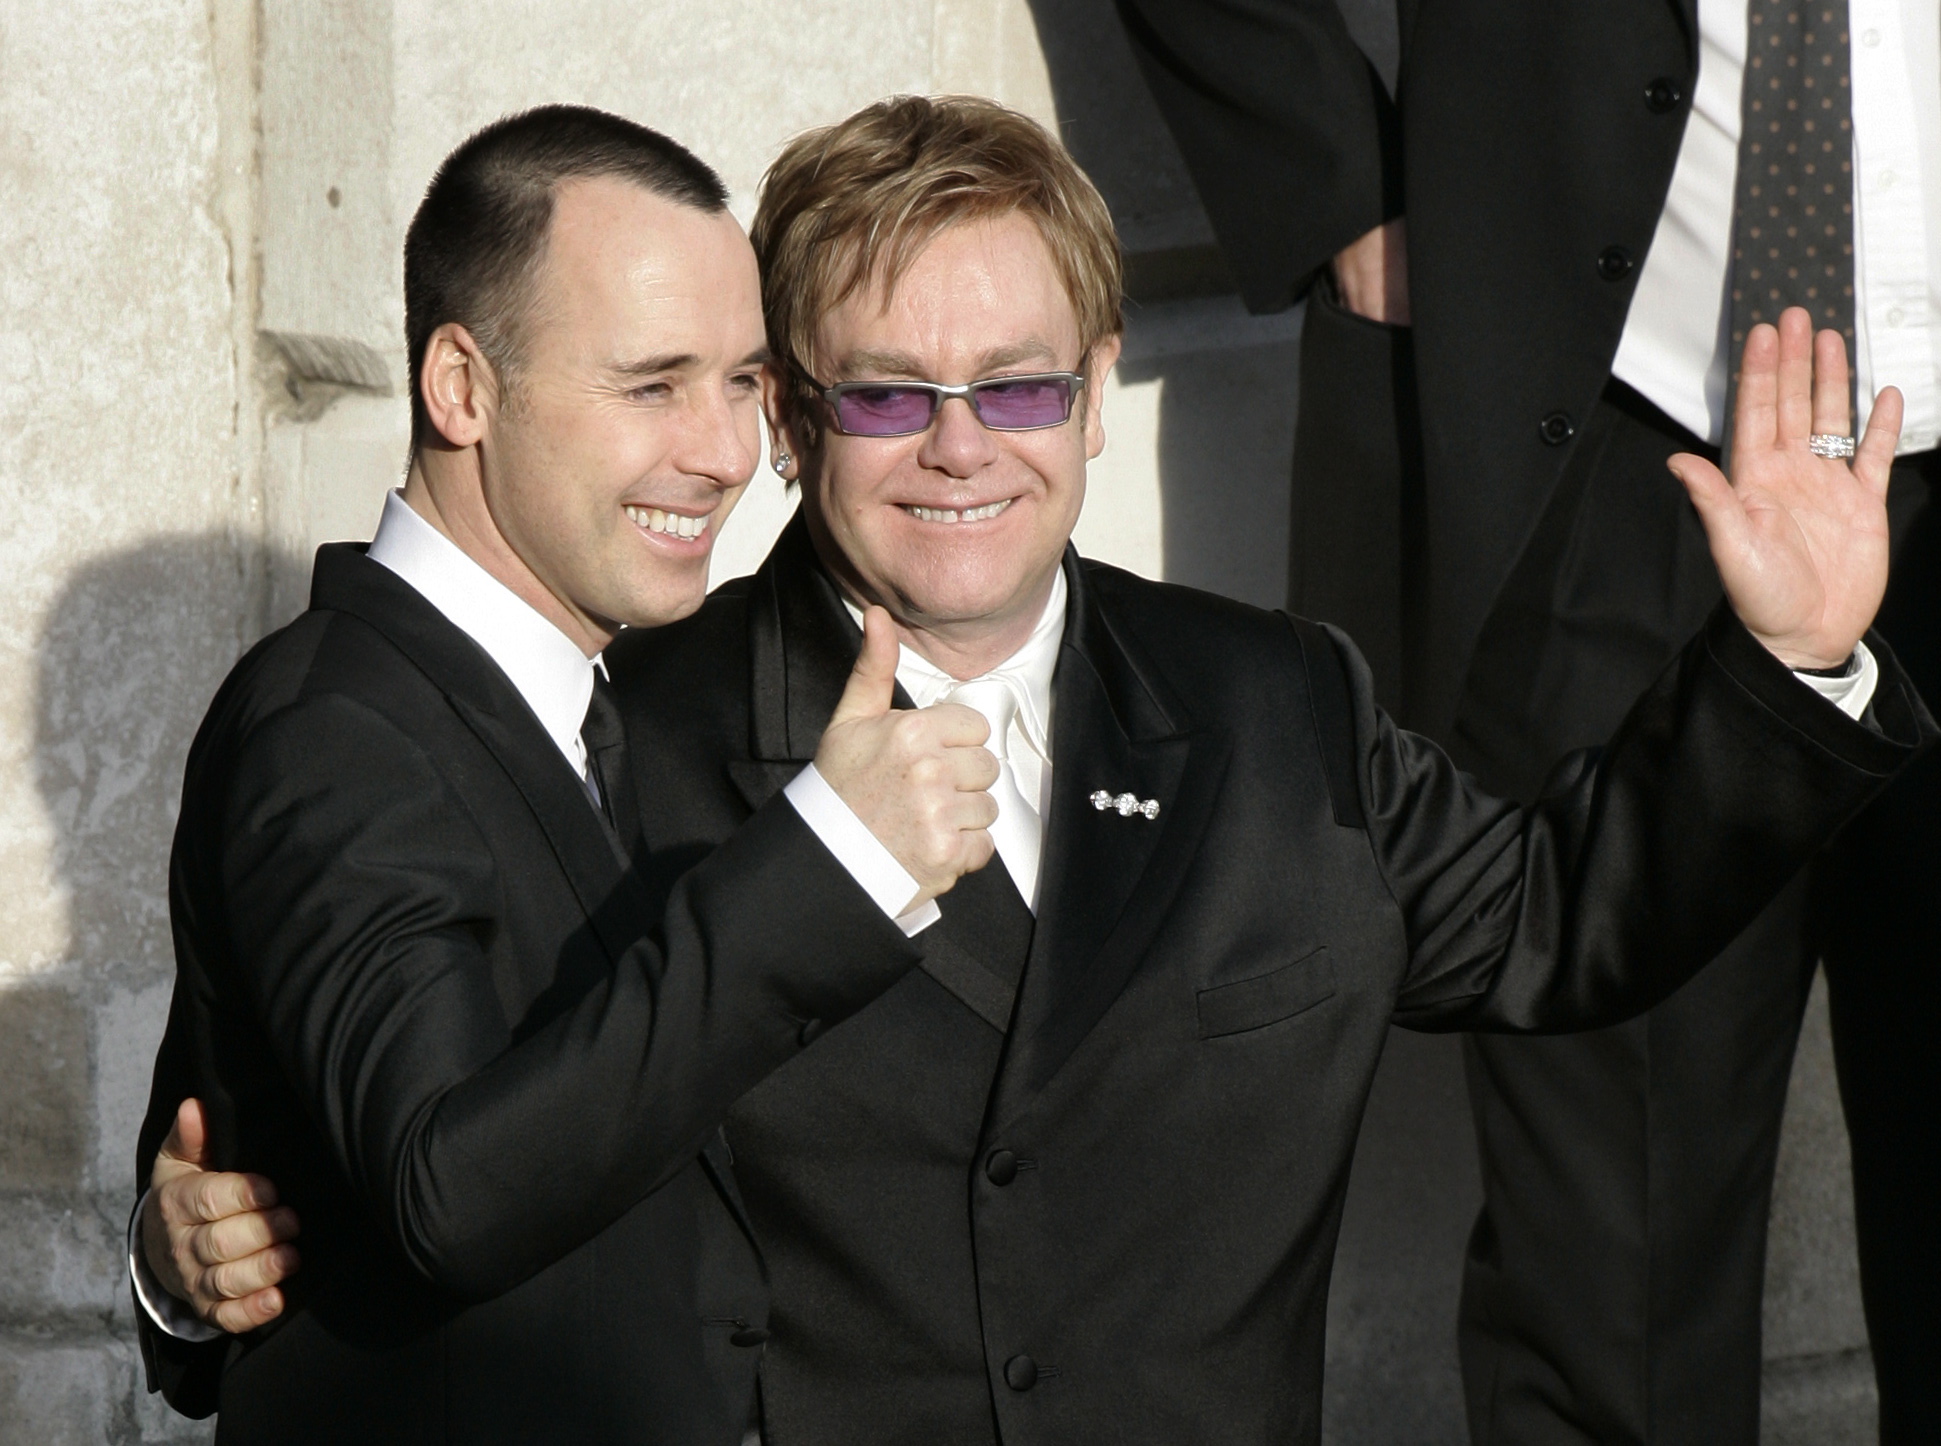 Pop star Elton John, right, and his longtime partner David Furnish, embrace as they wave to members of the media and the public after they had a civil ceremony at the Guildhall in the town of Windsor, England, in 2005.